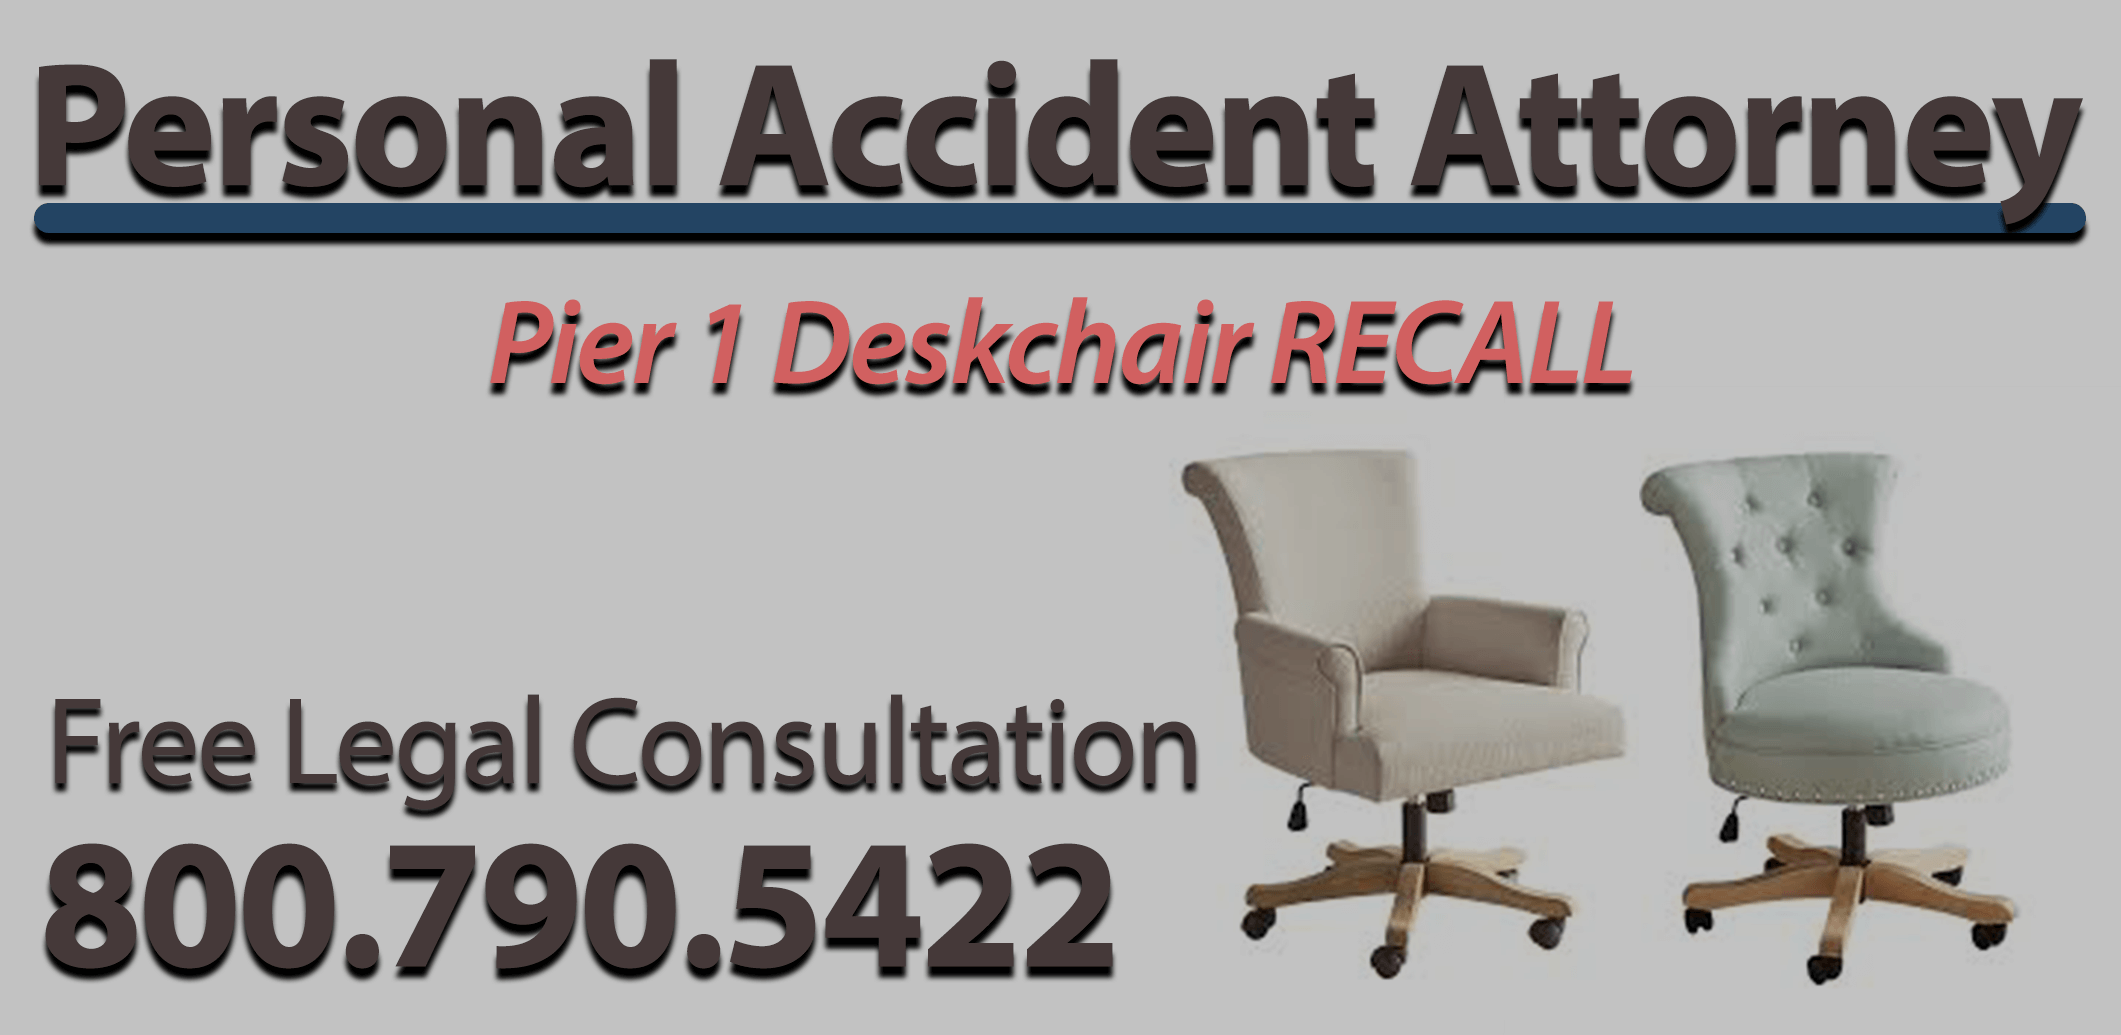 Pier 1 Issues A Recall For Desk Chairs Due To Fall And Injury Risk